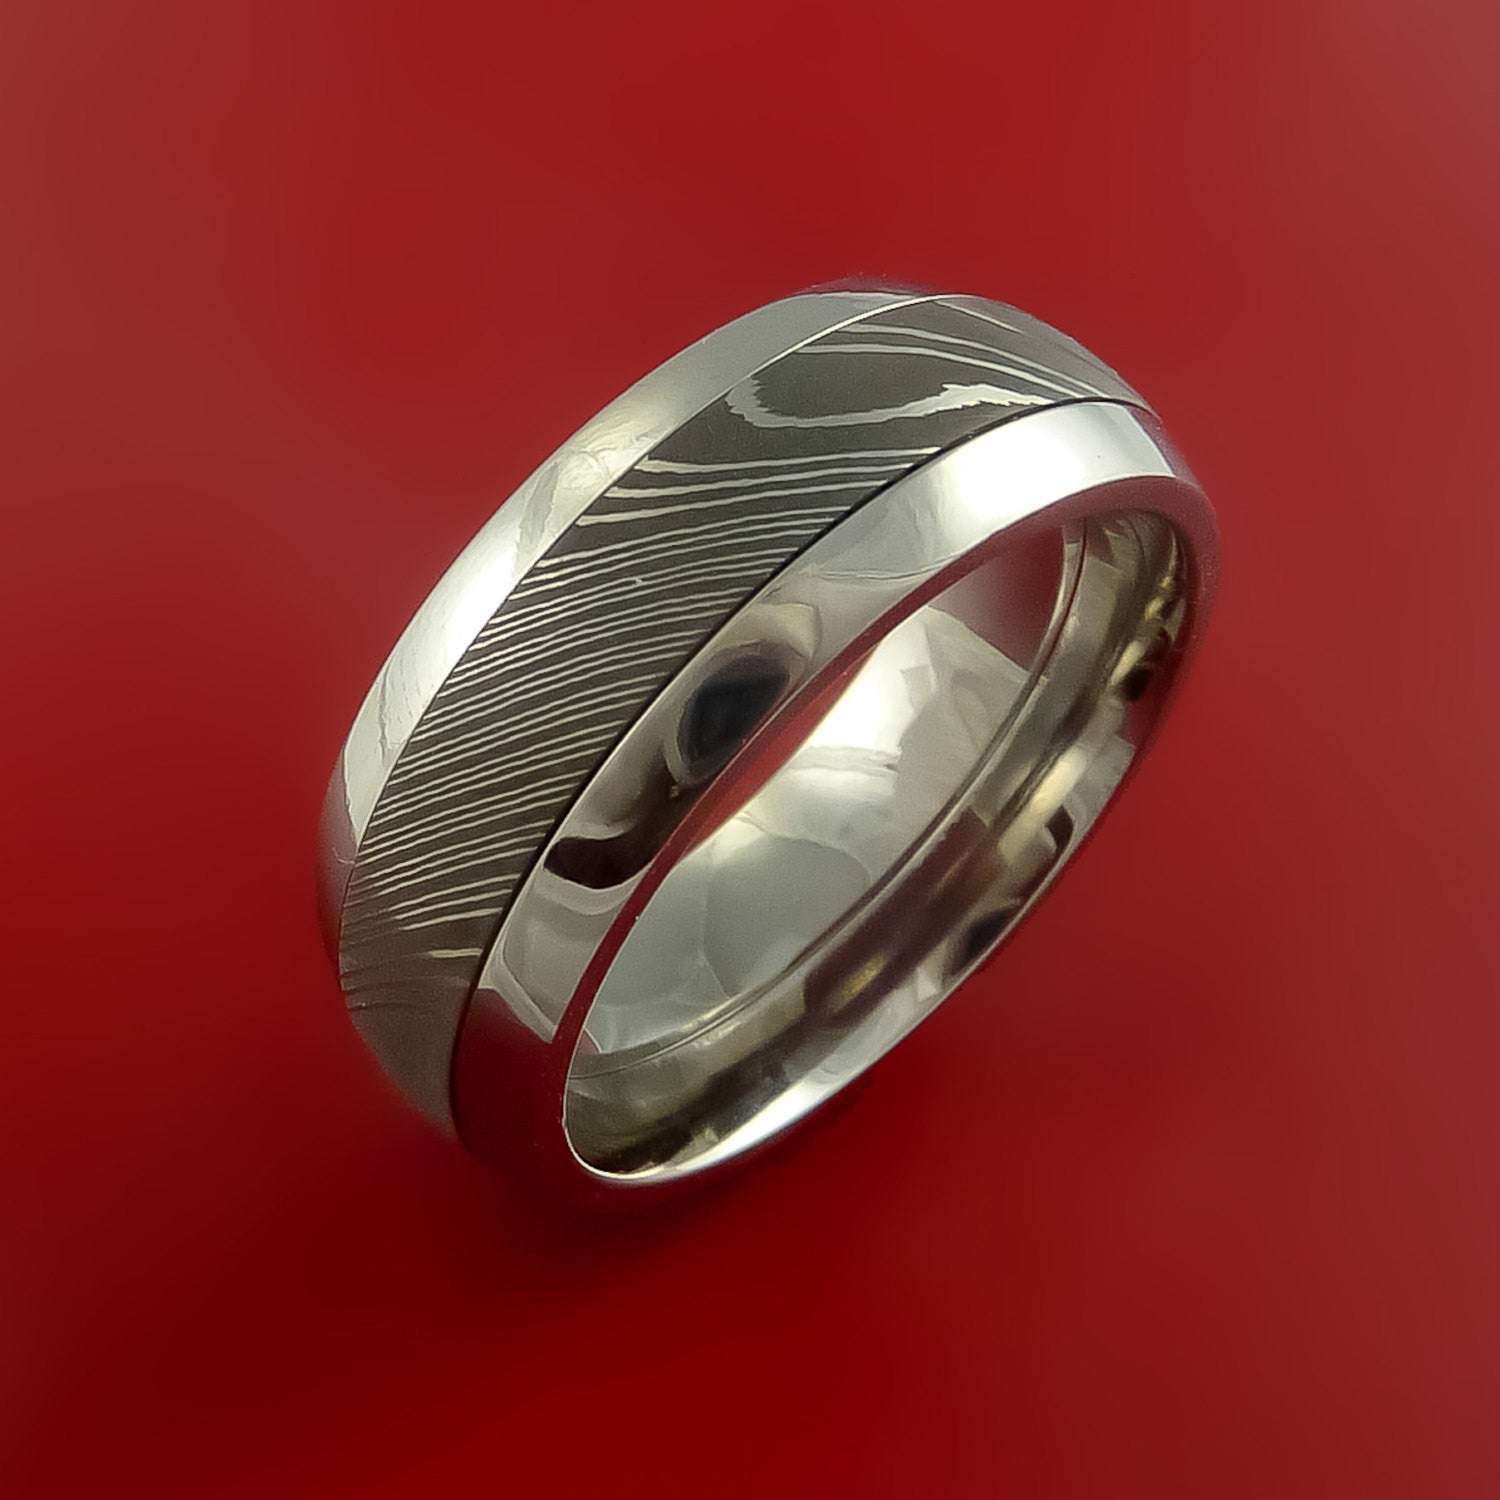 Surgical Stainless Steel 8mm Tribal Pattern Ring Wedding Band Matte Finish,  Size 8 | Amazon.com